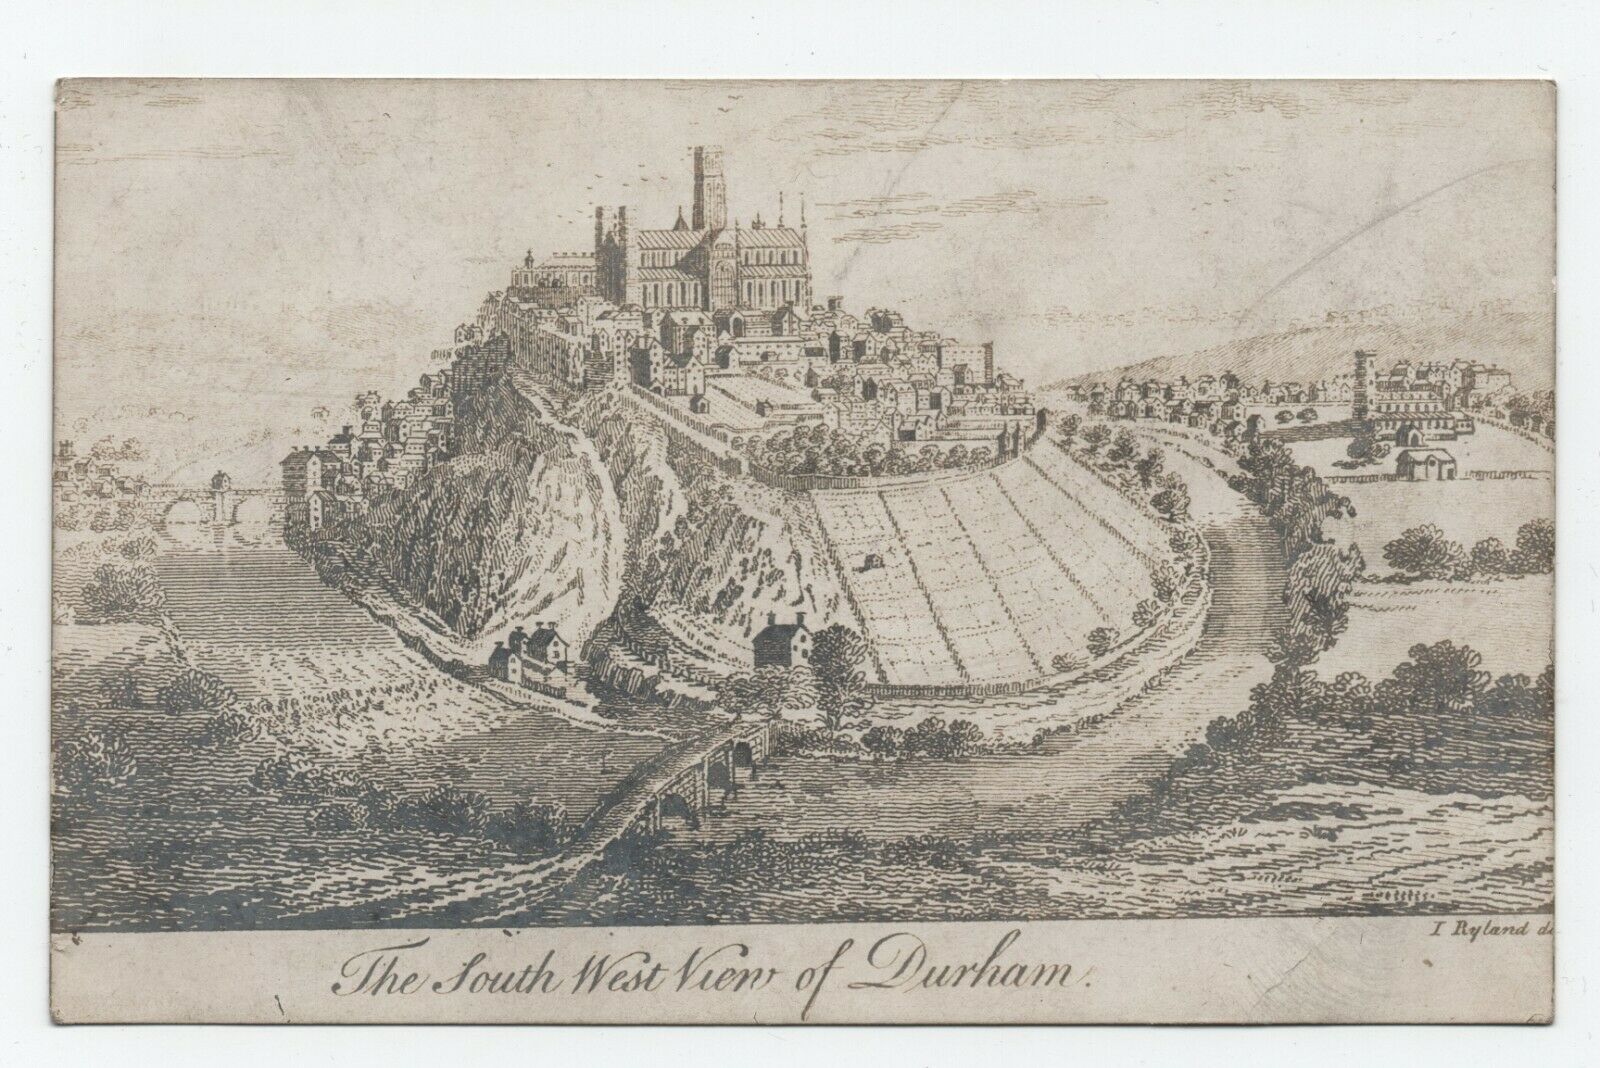 House Clearance - South West view of Durham, County Durham - etching